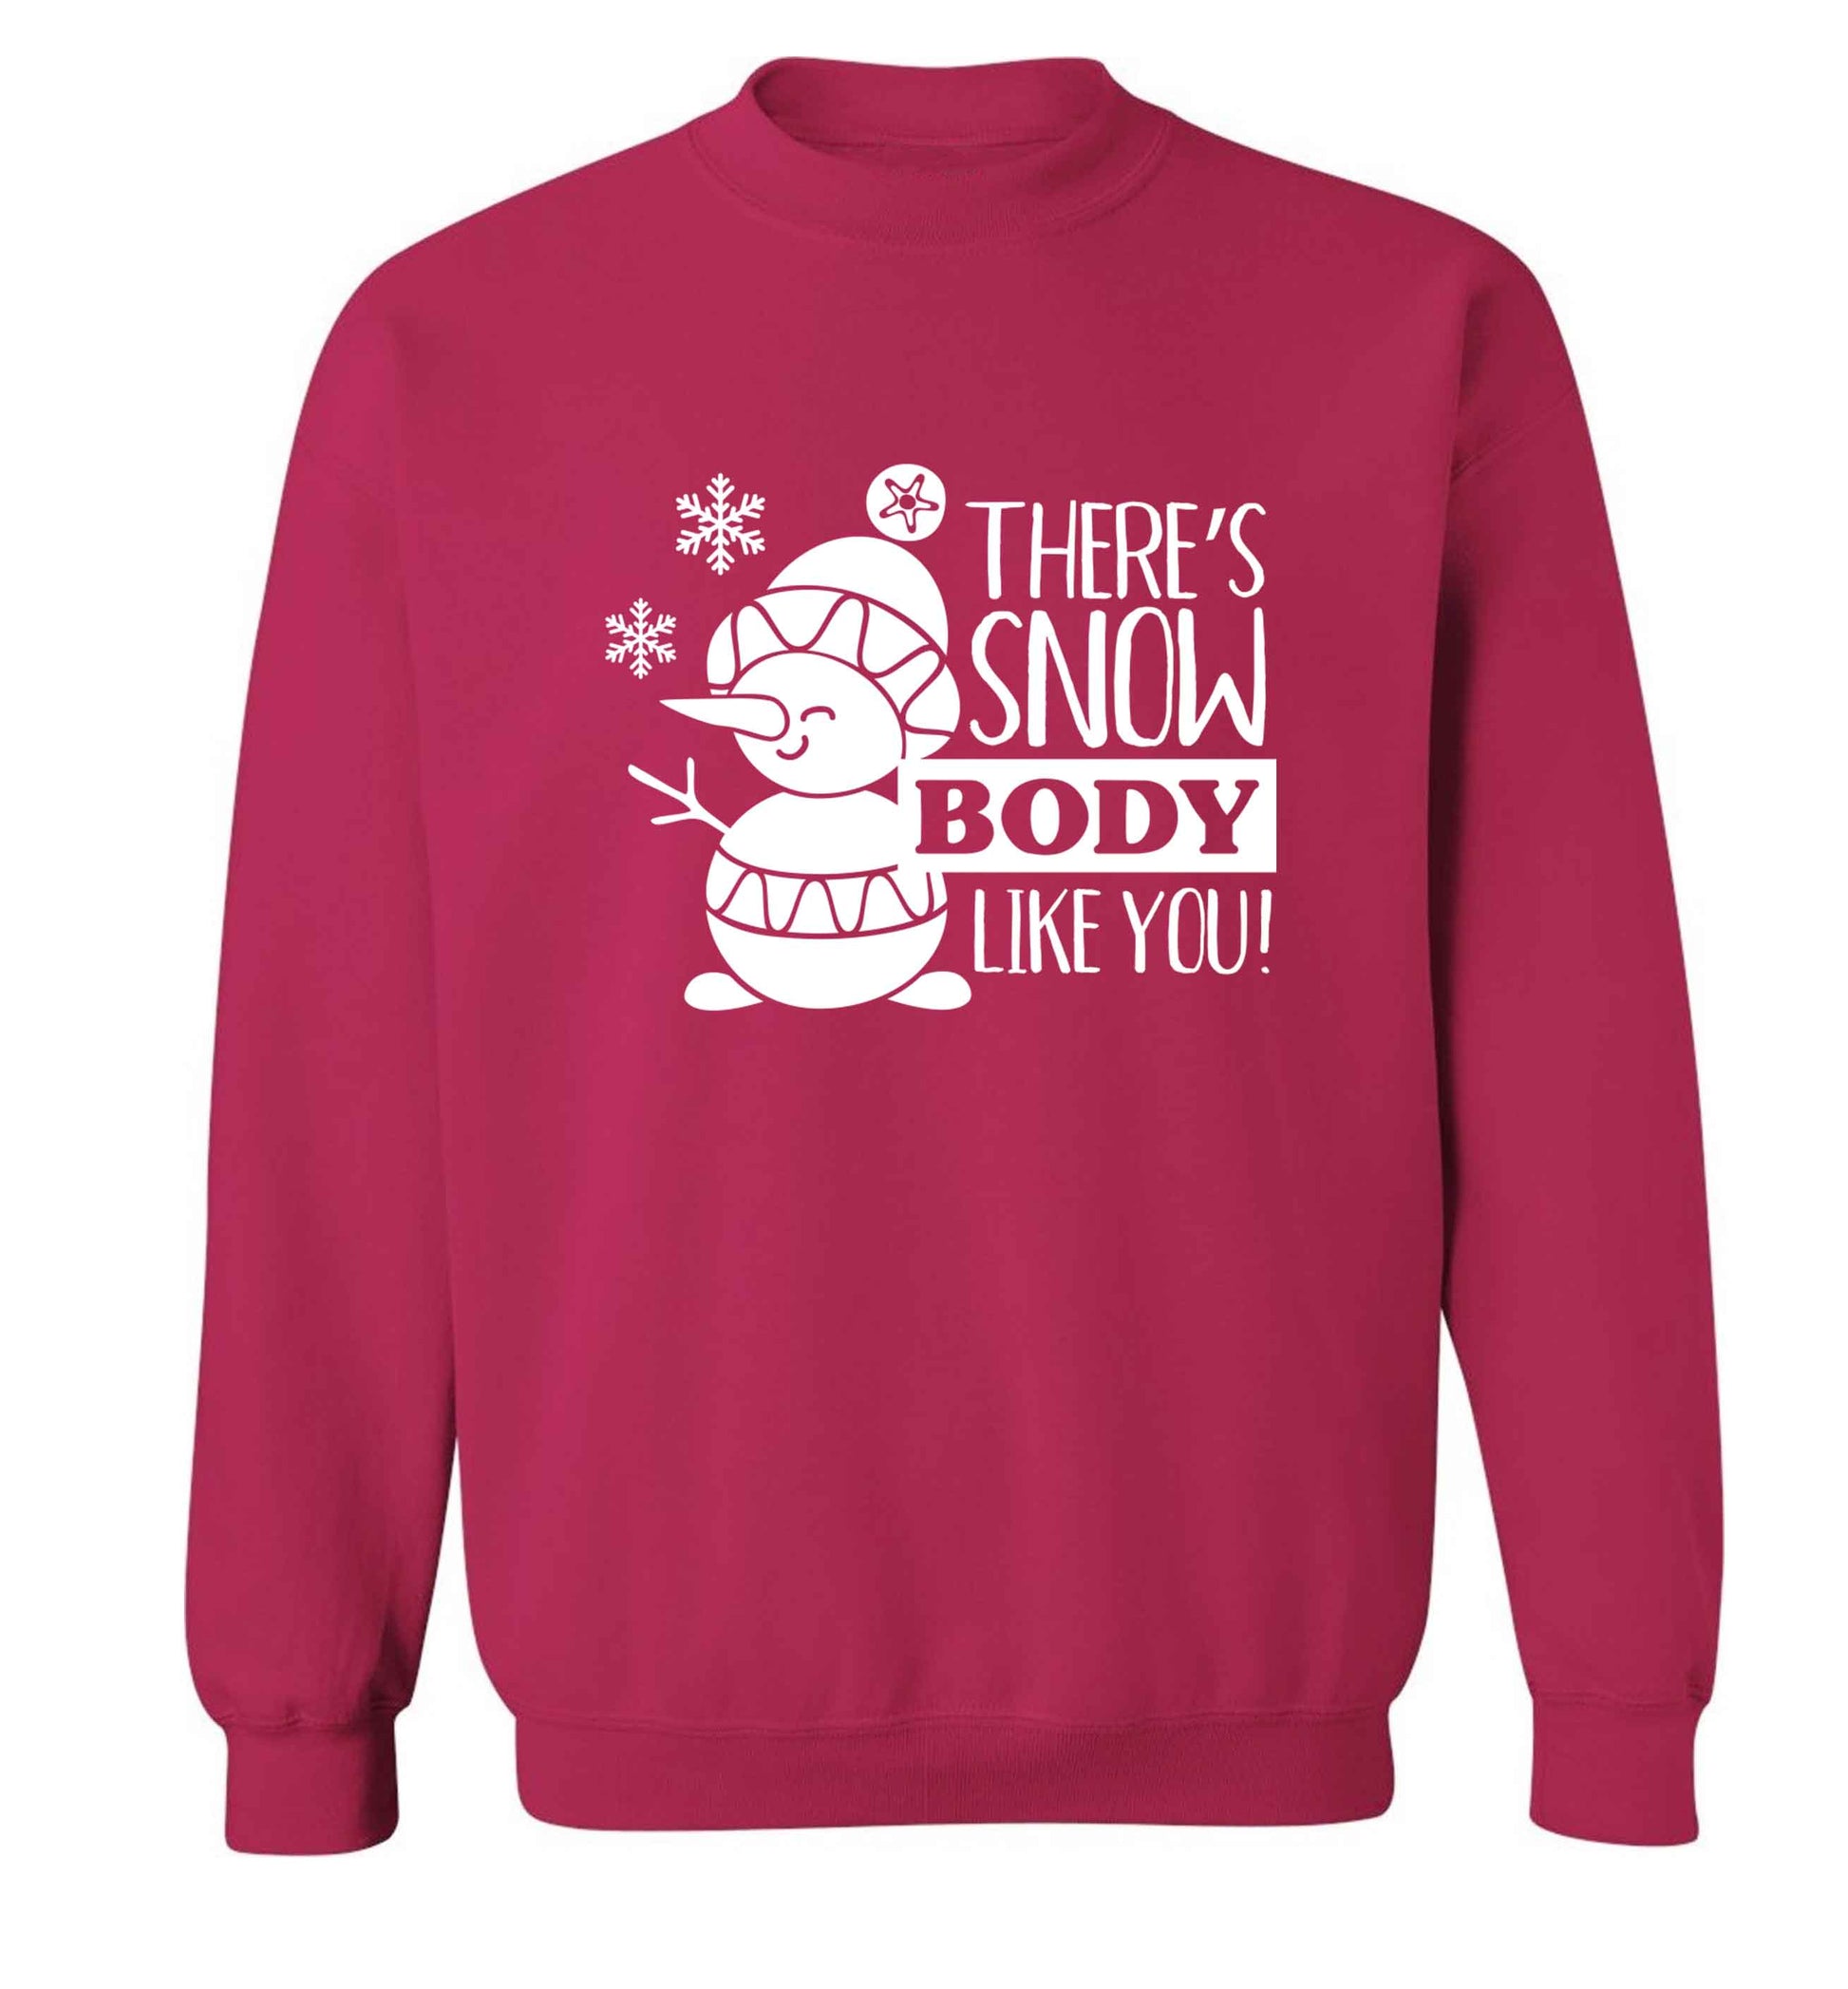 There's snow body like you adult's unisex pink sweater 2XL